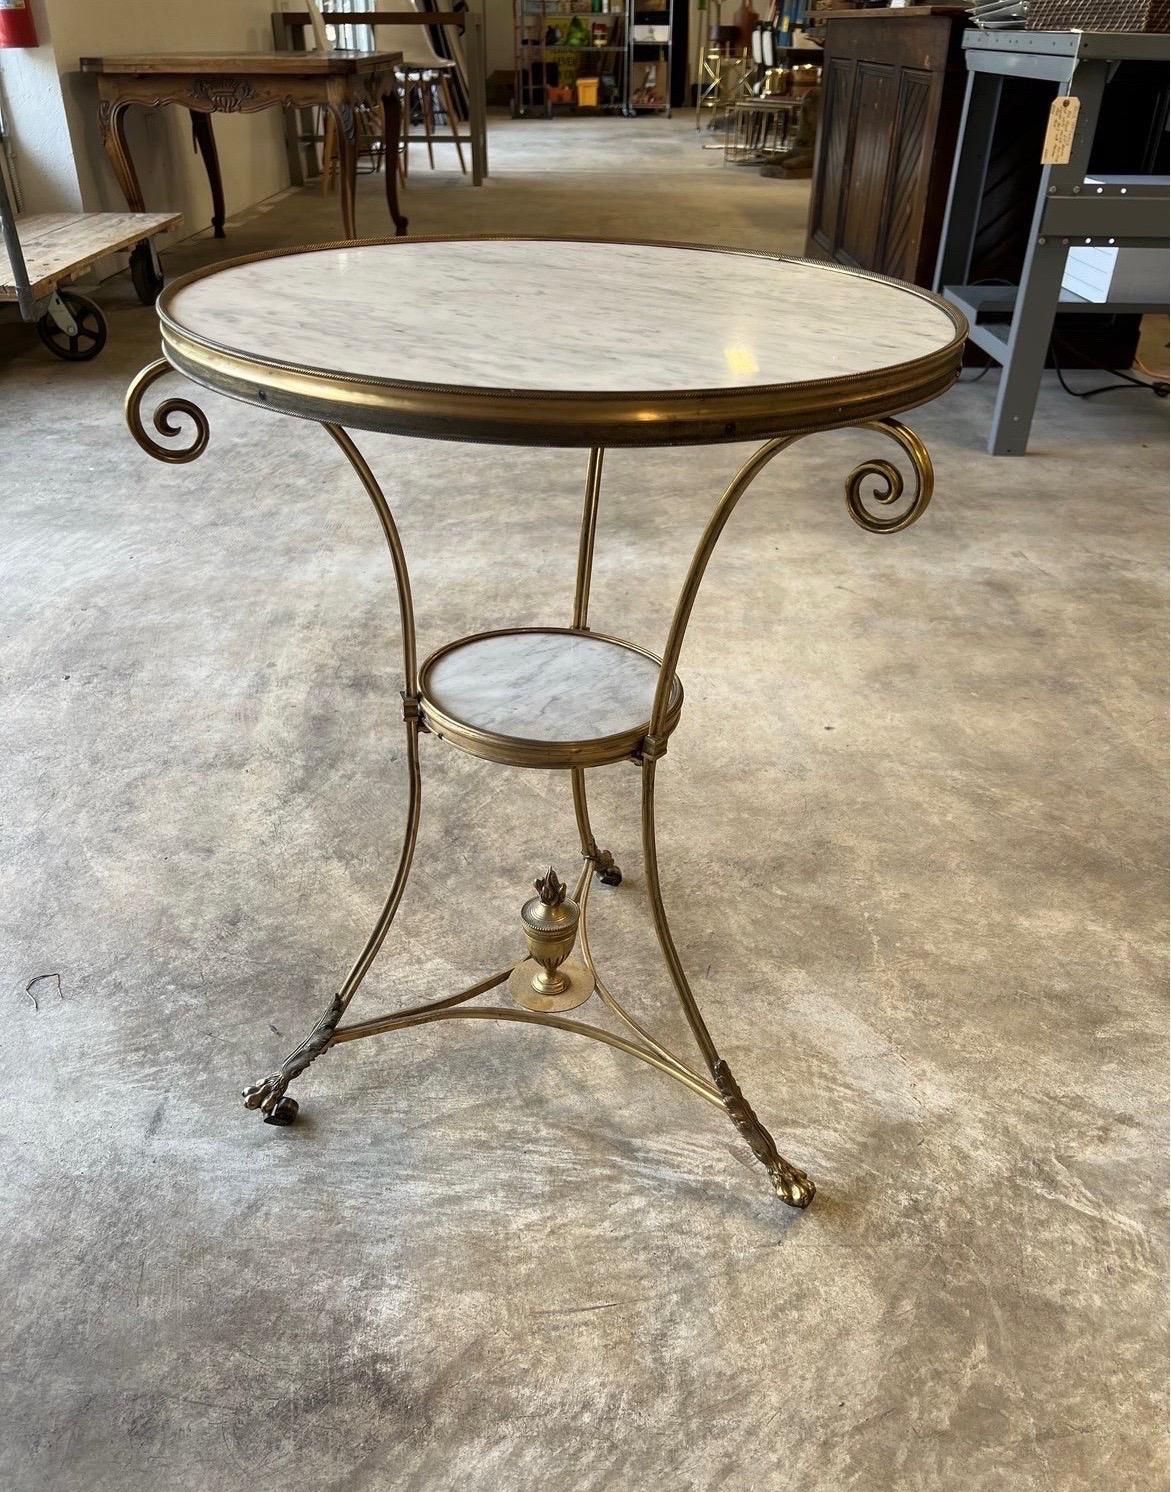 19th Century French Gilt Bronze & White Marble Two-Tiered Gueridon Table For Sale 8